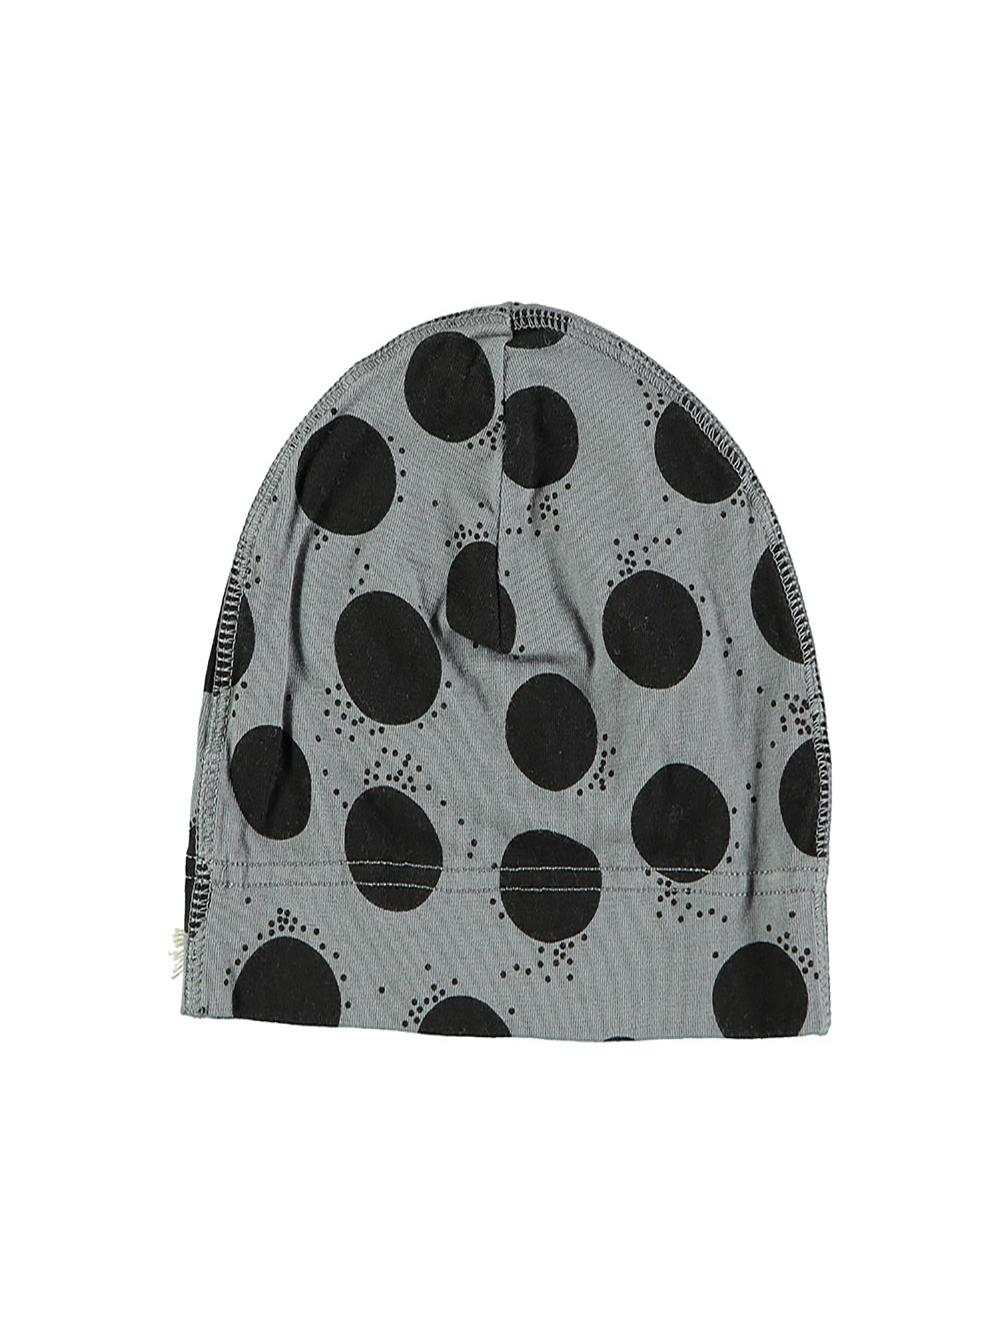 GRAY HAT WITH BLACK DOTS PRINT